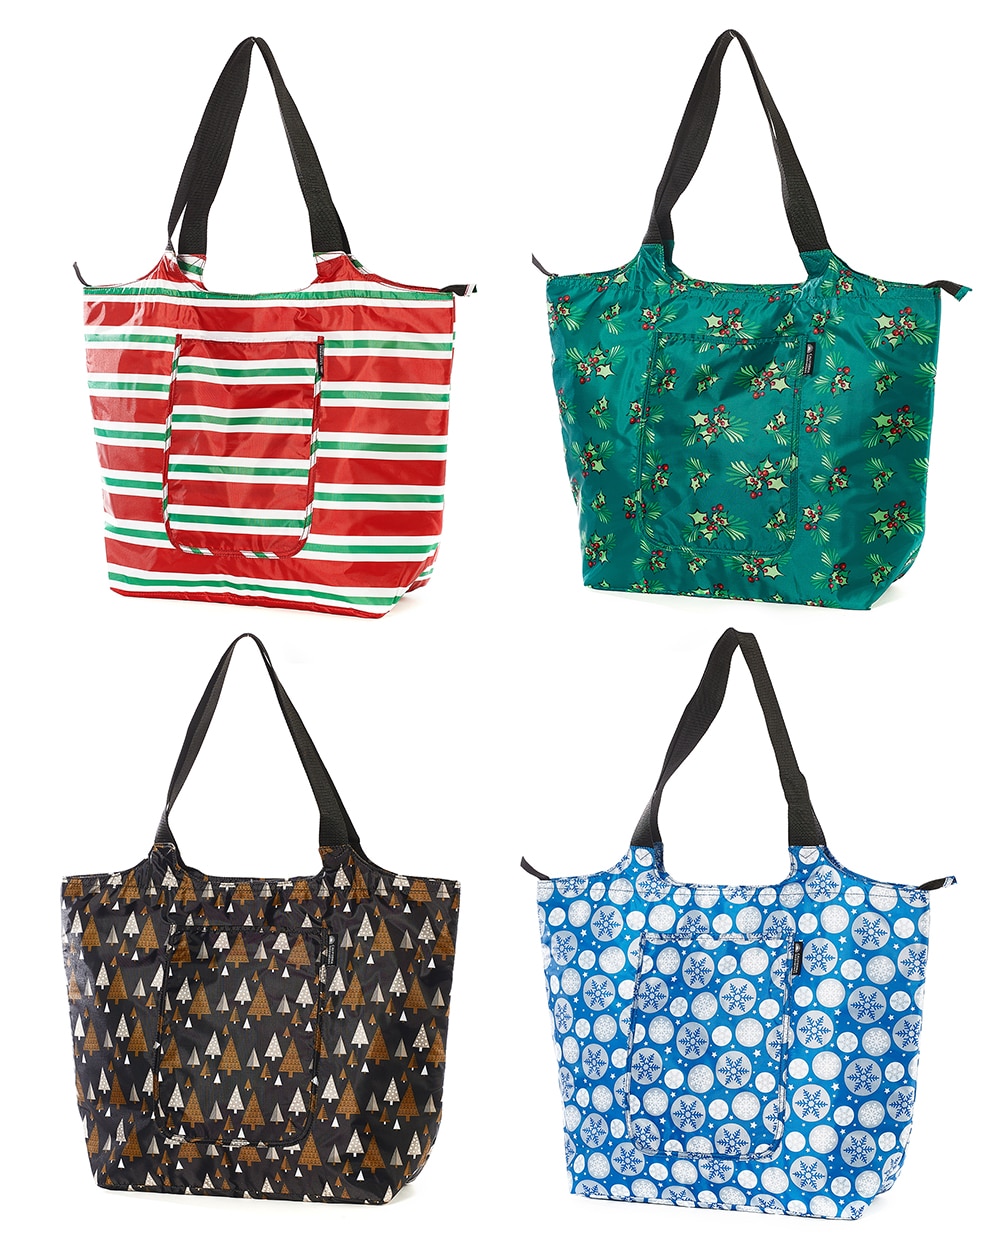 Zip tote with pouch - Porter - Bags - Shop